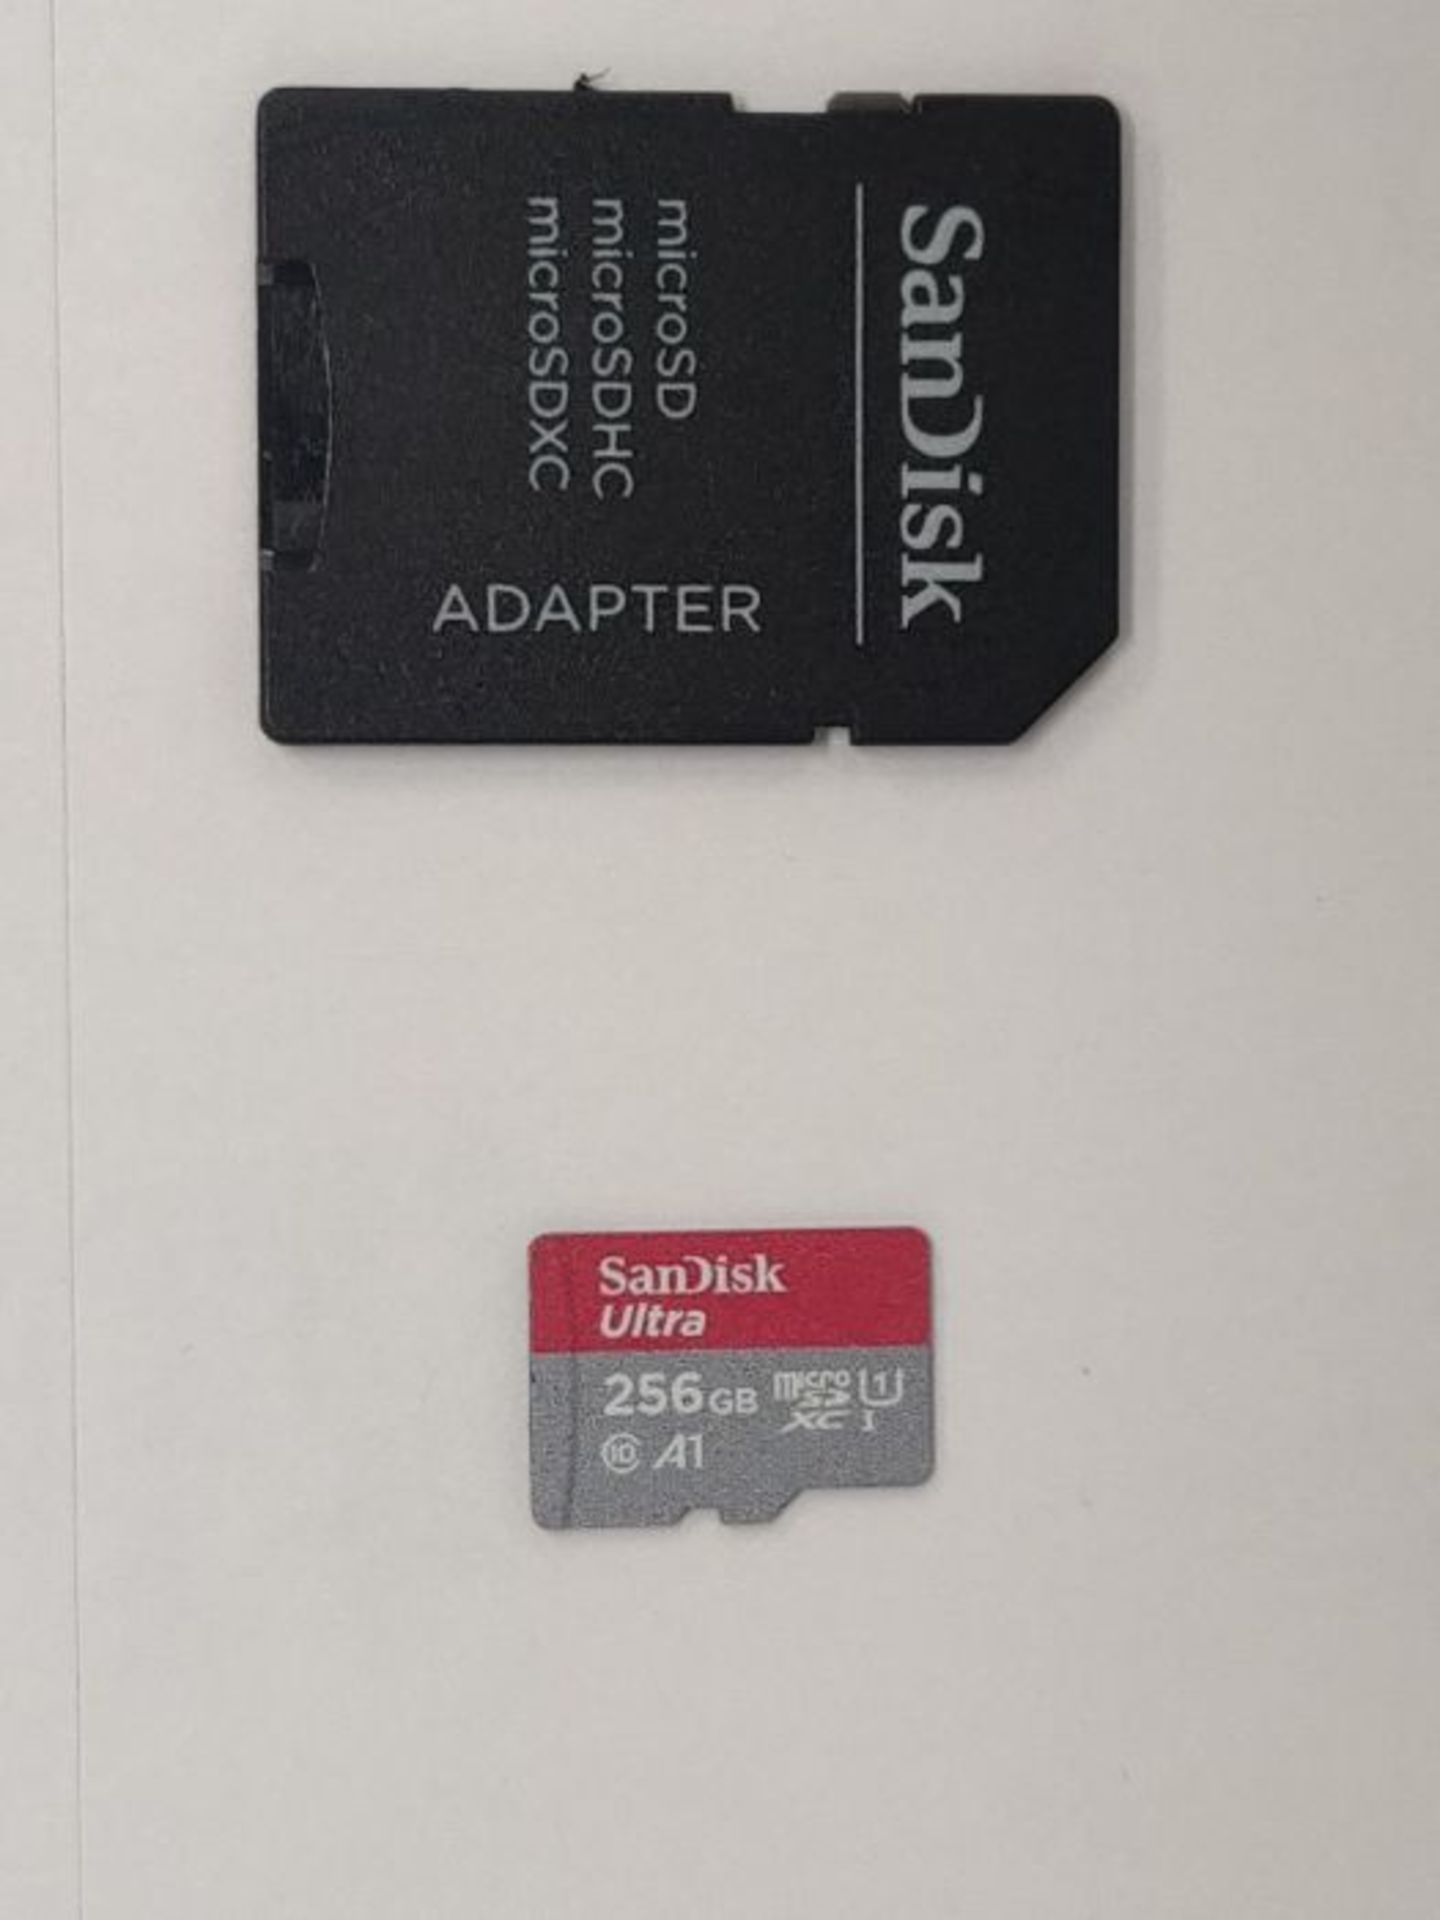 SanDisk Ultra 256 GB microSDXC Memory Card SD Adapter with A1 App Performance Up to - Image 2 of 2